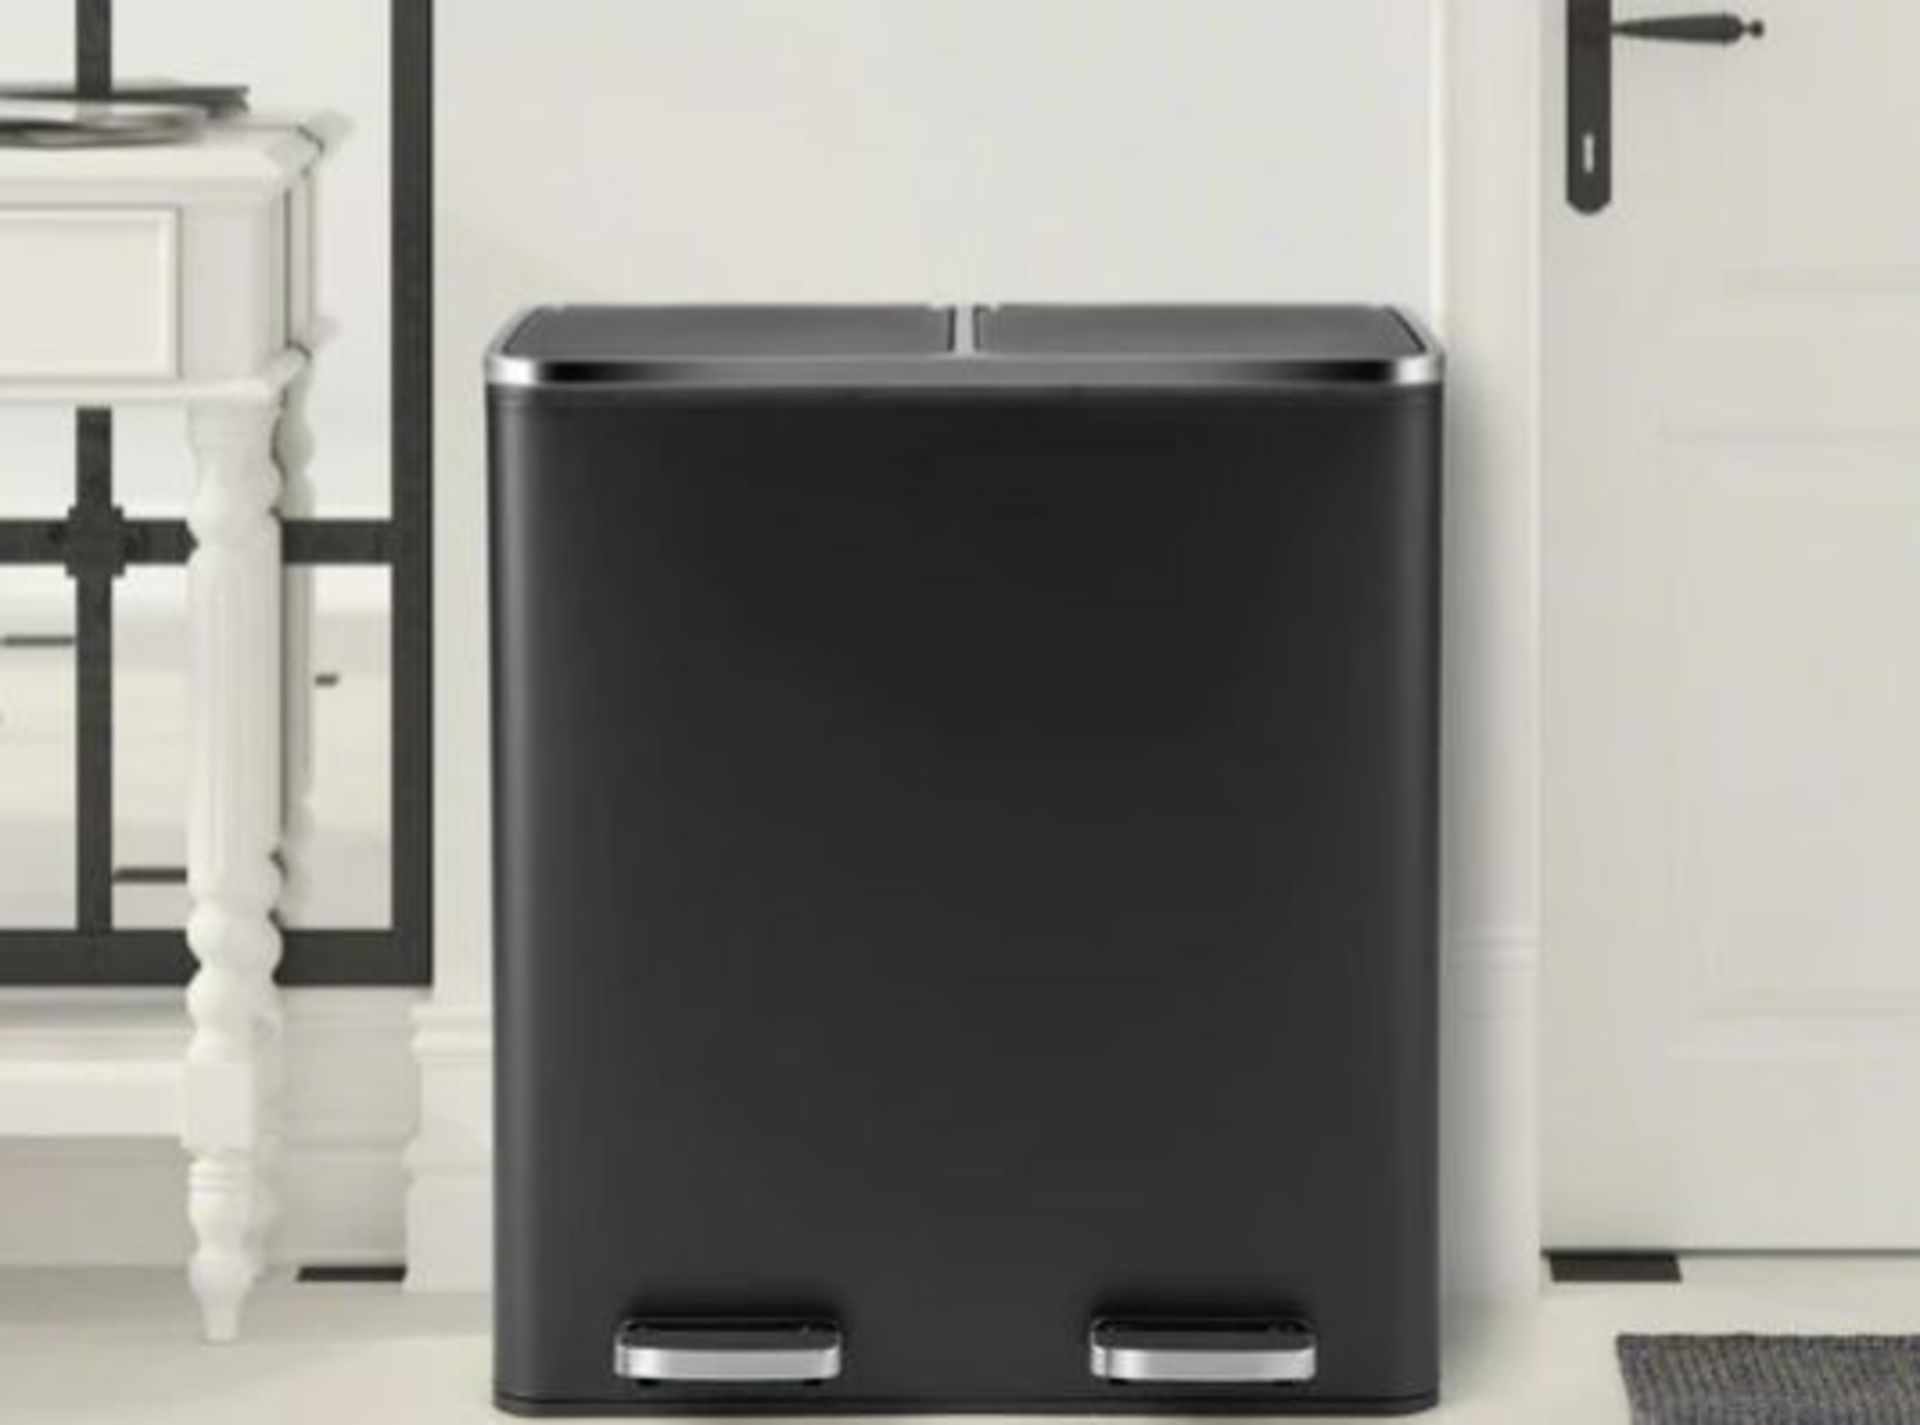 DOUBLE RECYCLE PEDAL BIN WTH DUAL REMOVABLE COMPARTMENTS-BLACK. - ER53. A perfect 60L stainless